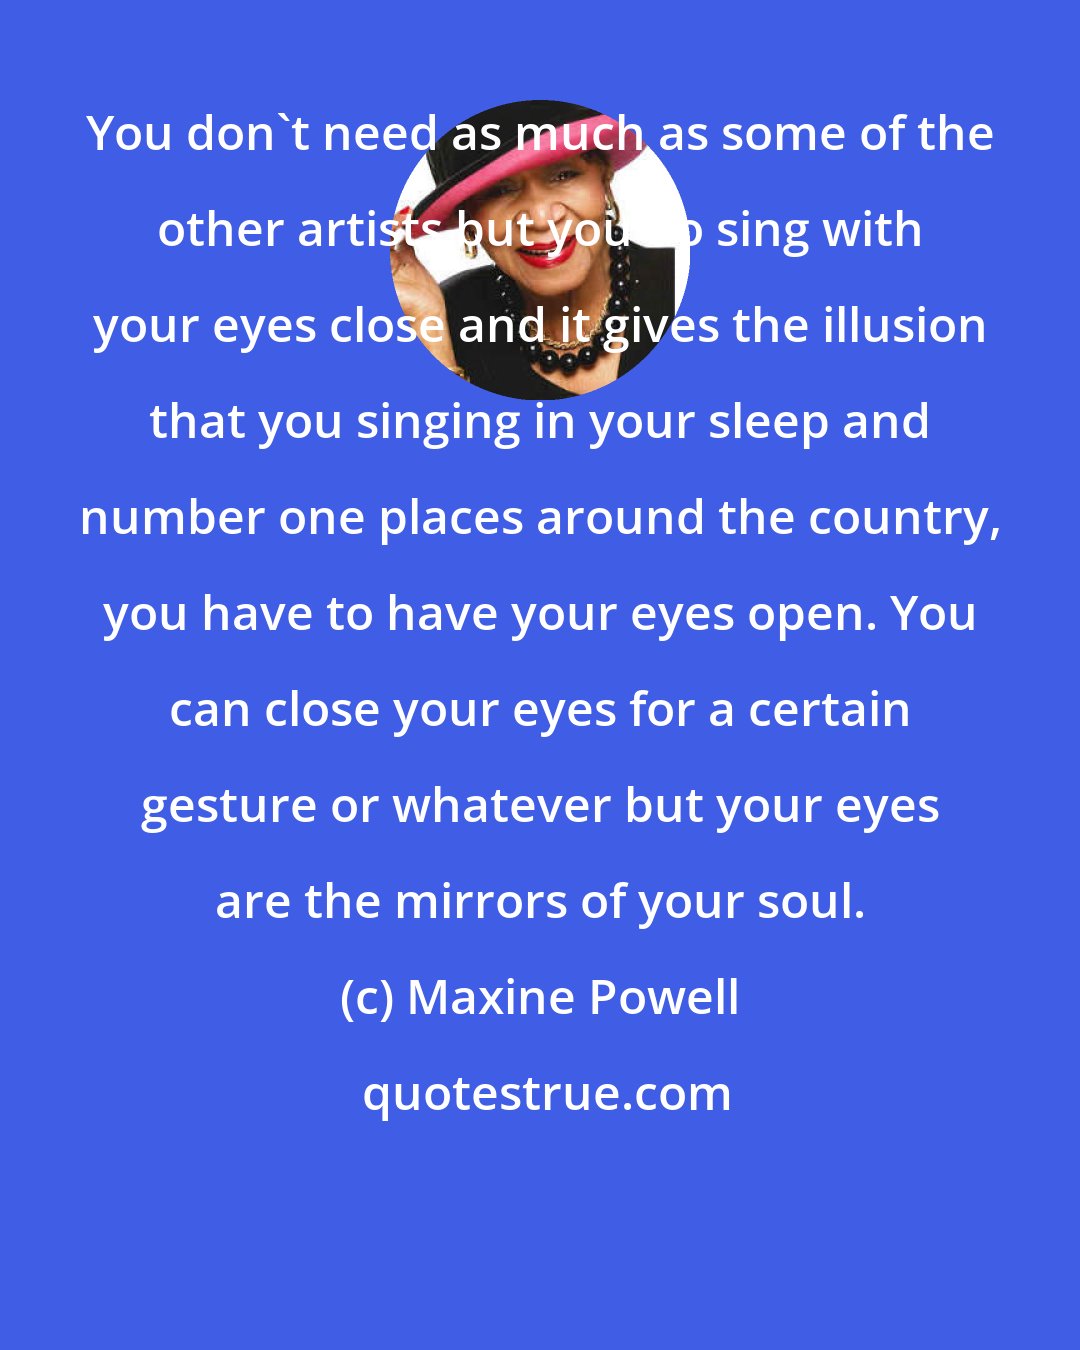 Maxine Powell: You don't need as much as some of the other artists but you do sing with your eyes close and it gives the illusion that you singing in your sleep and number one places around the country, you have to have your eyes open. You can close your eyes for a certain gesture or whatever but your eyes are the mirrors of your soul.